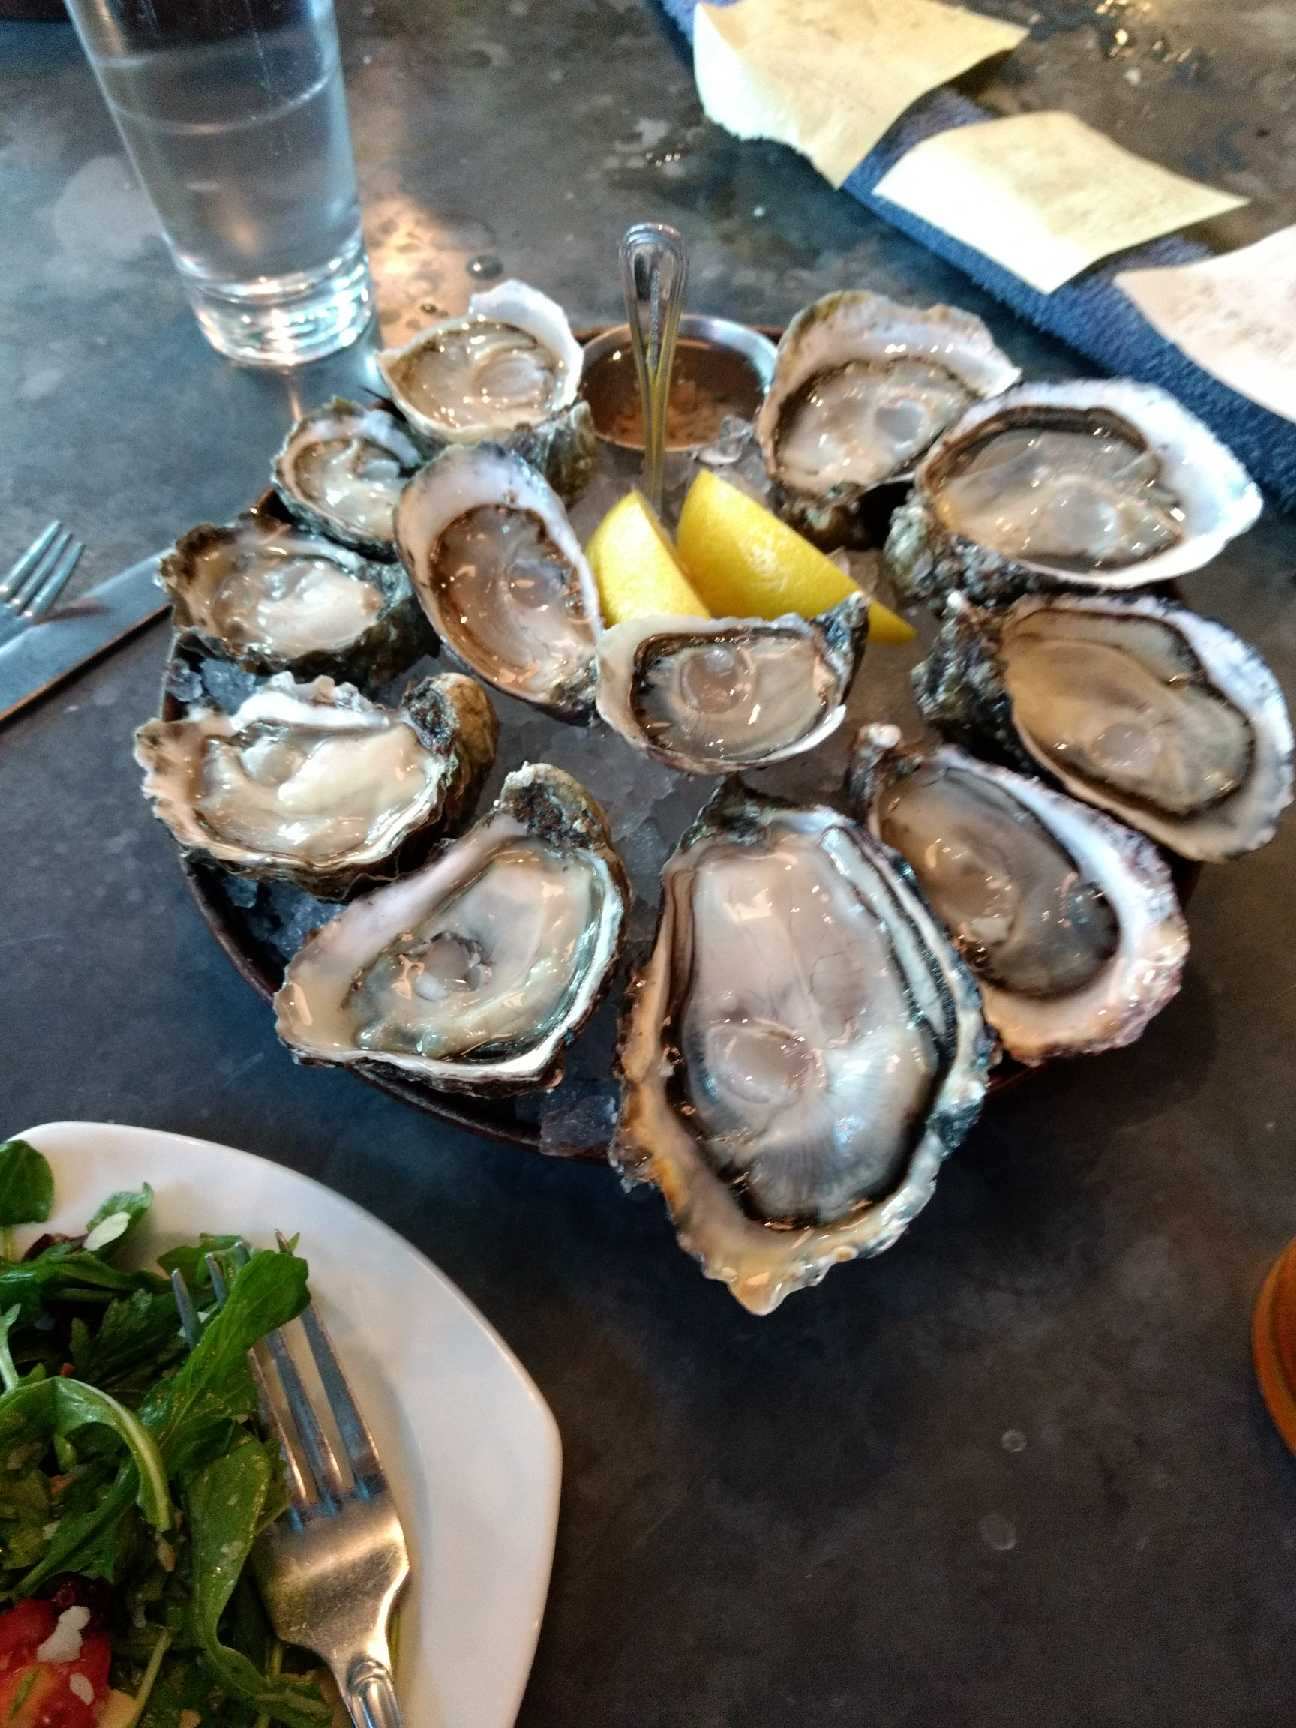 Oysters from Taylor's Shellfish - Seattle, WA